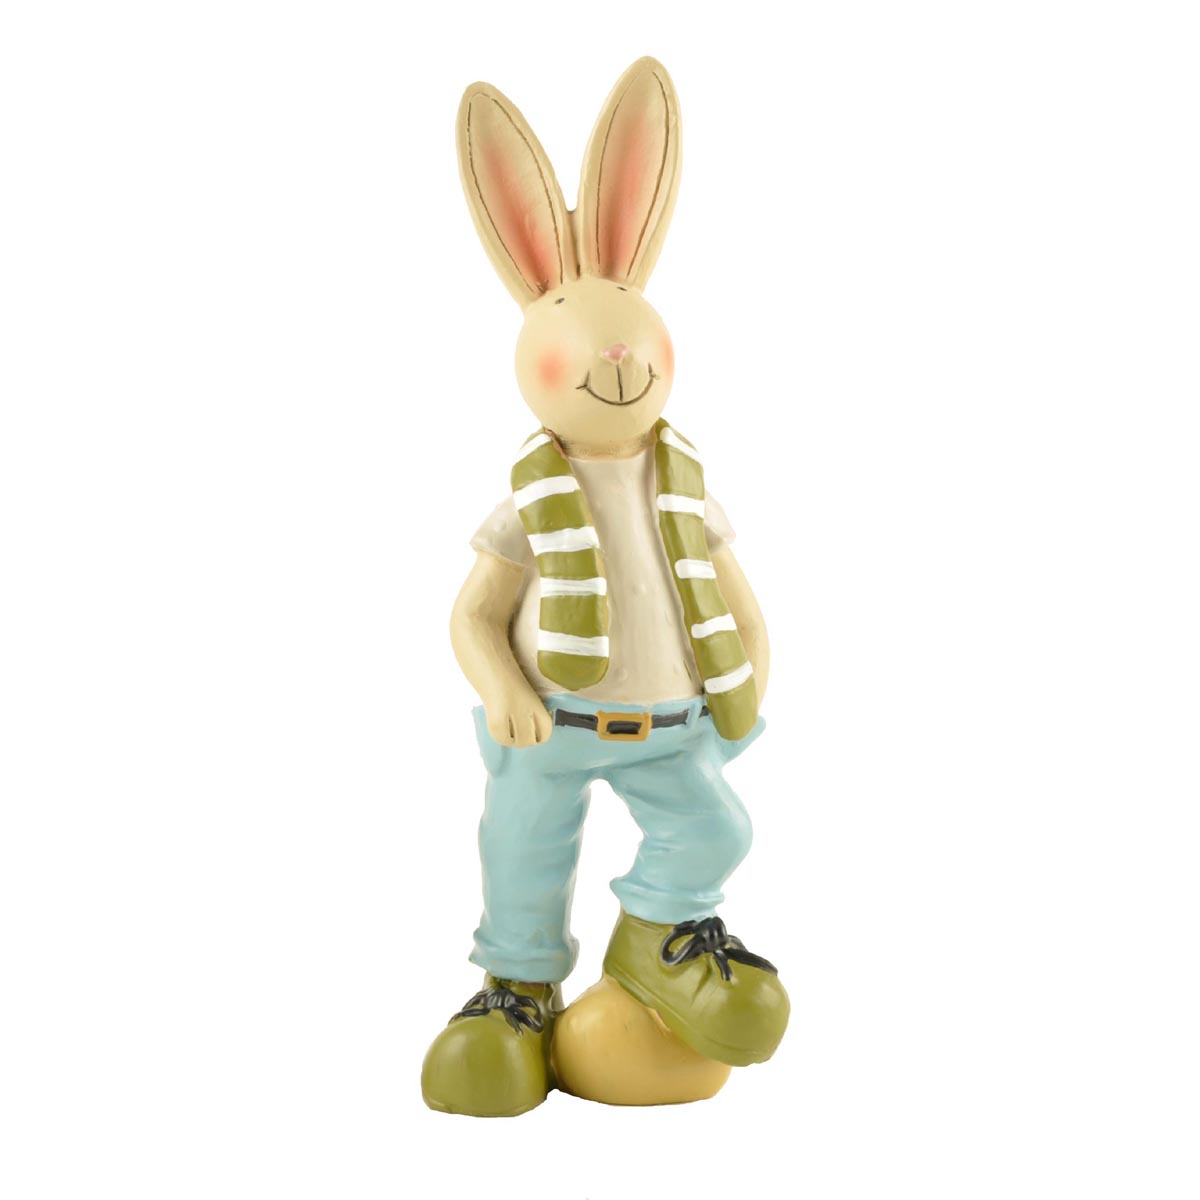 Ennas easter figurines polyresin for holiday gift